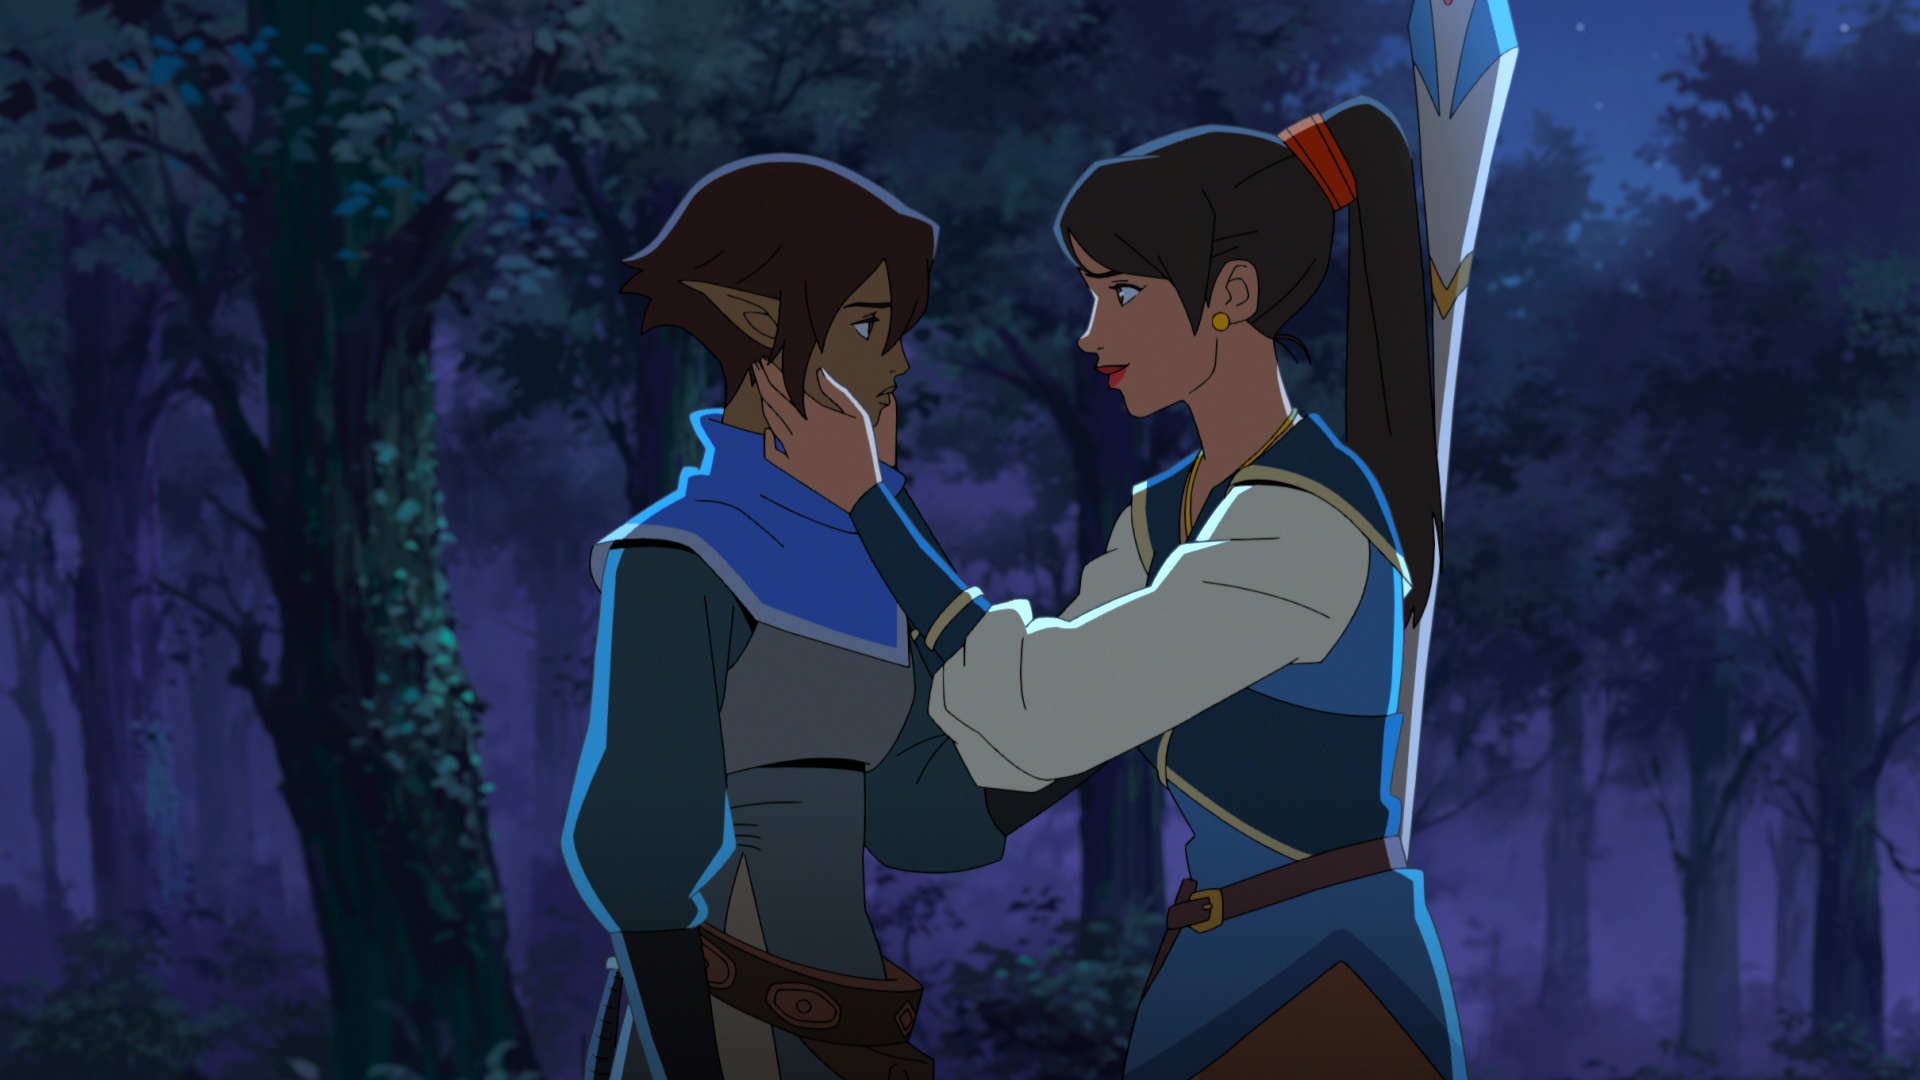 Dragon Age: Absolution - Hira and Miri share a moment together in a dark forest as Hira tenderly touches Miri's face.